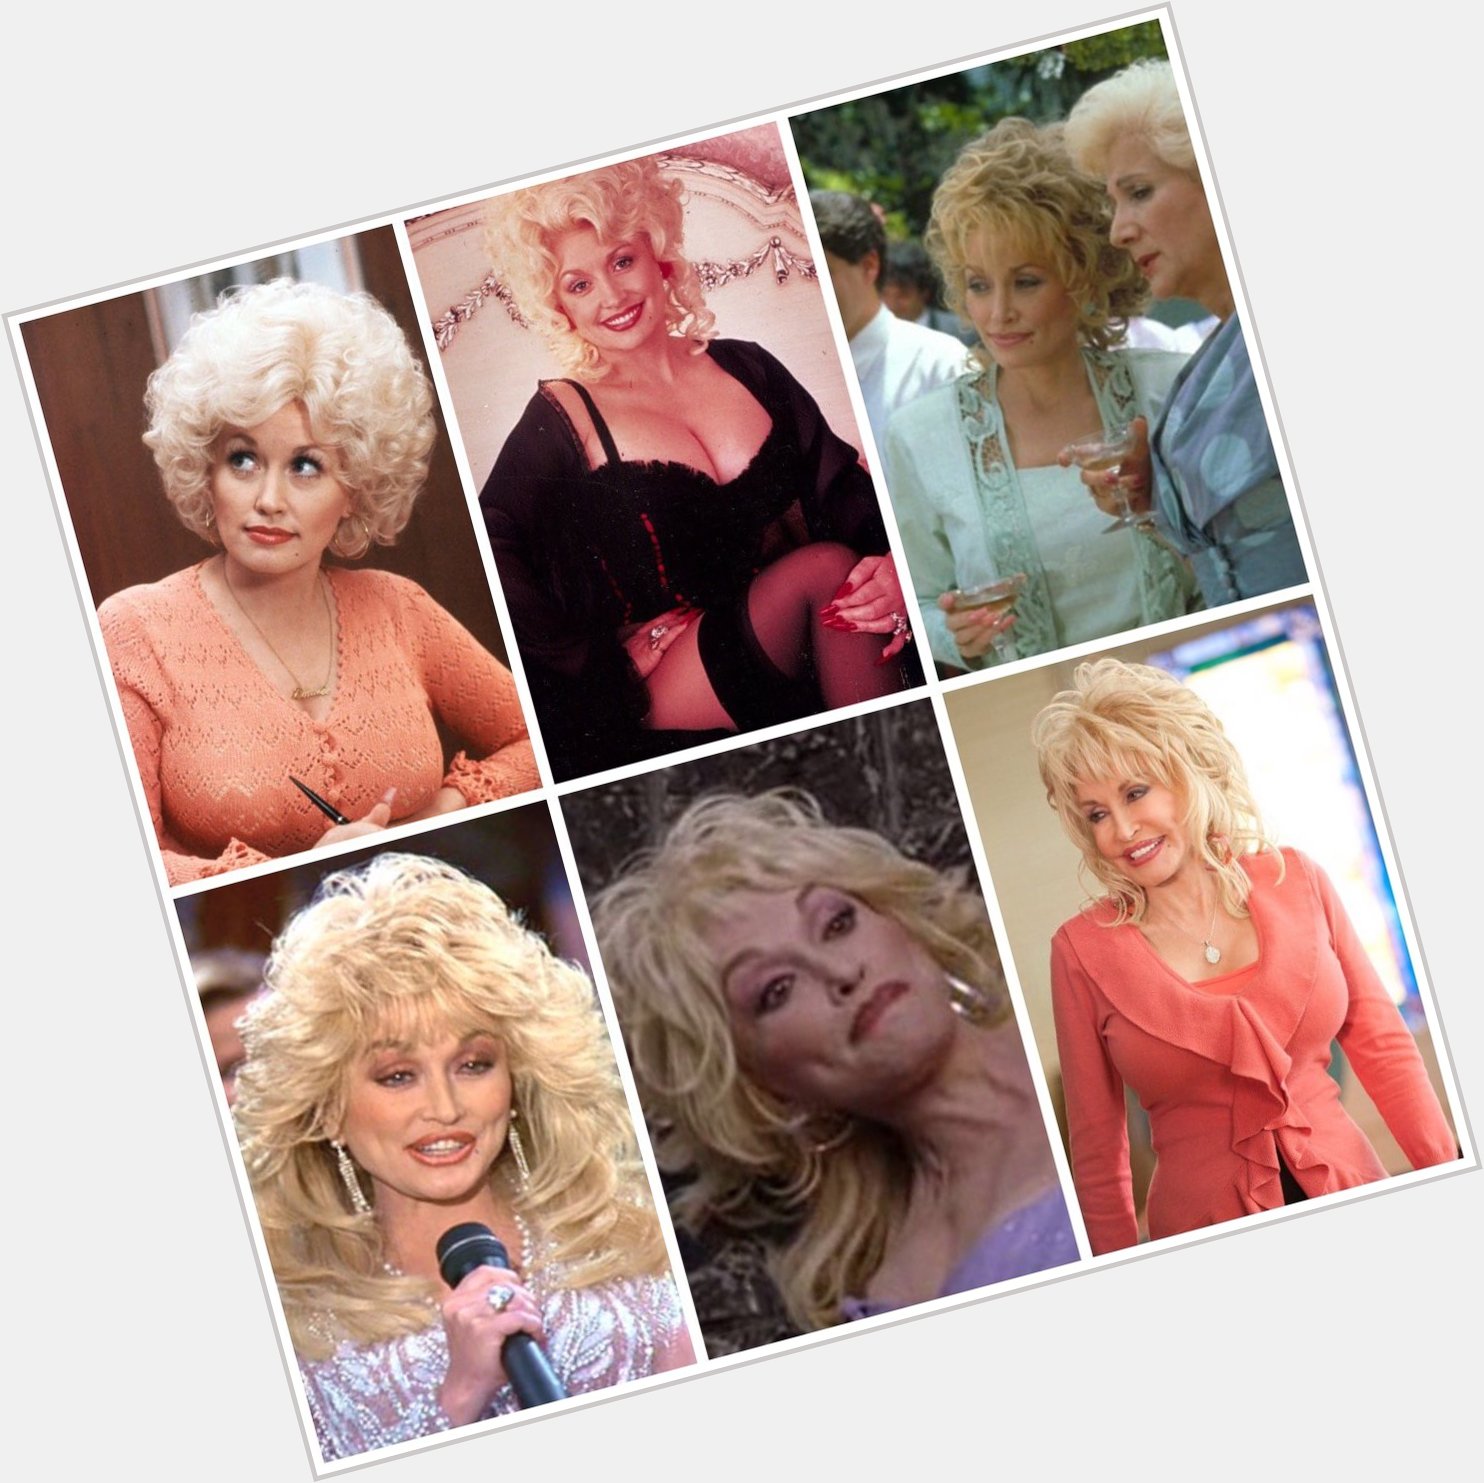 Happy birthday, Dolly Parton! 72 today. Some appearances in film: 